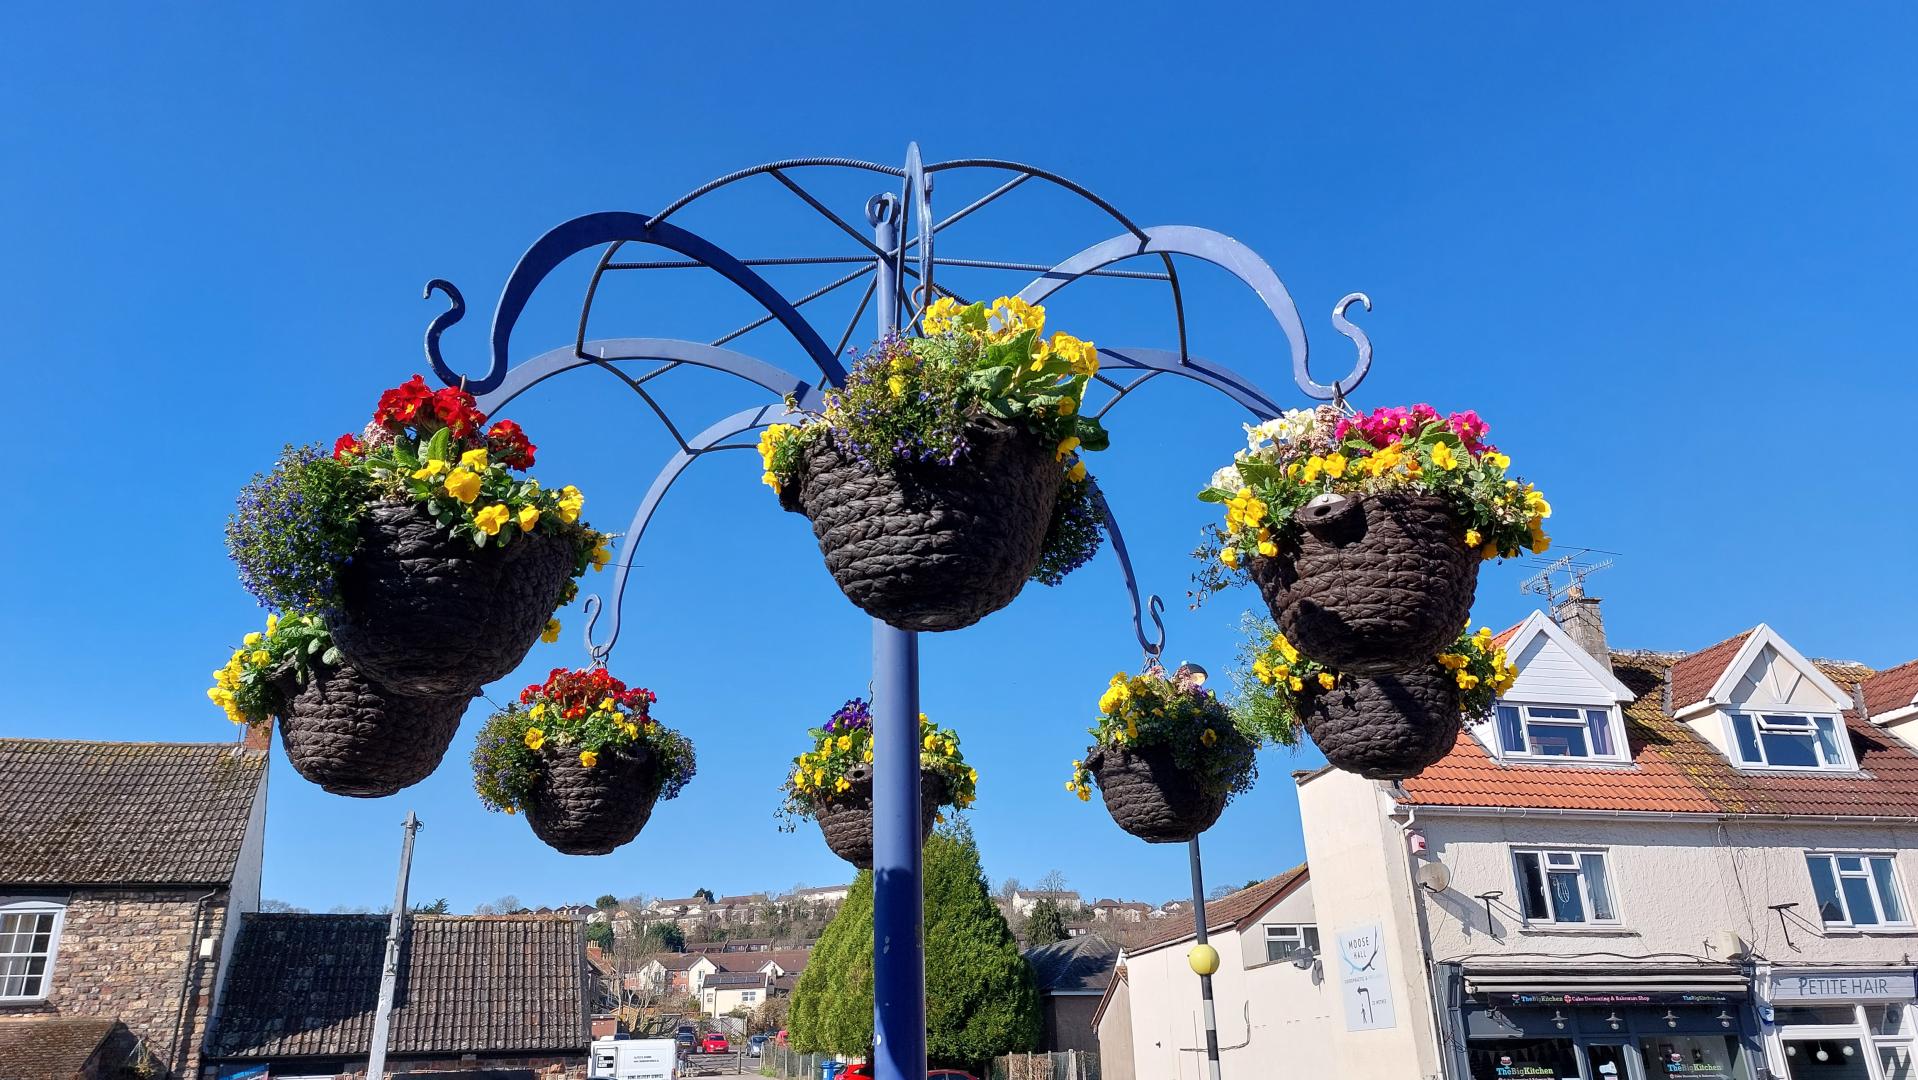 A photo of hanging baskets floral display in Portishead.